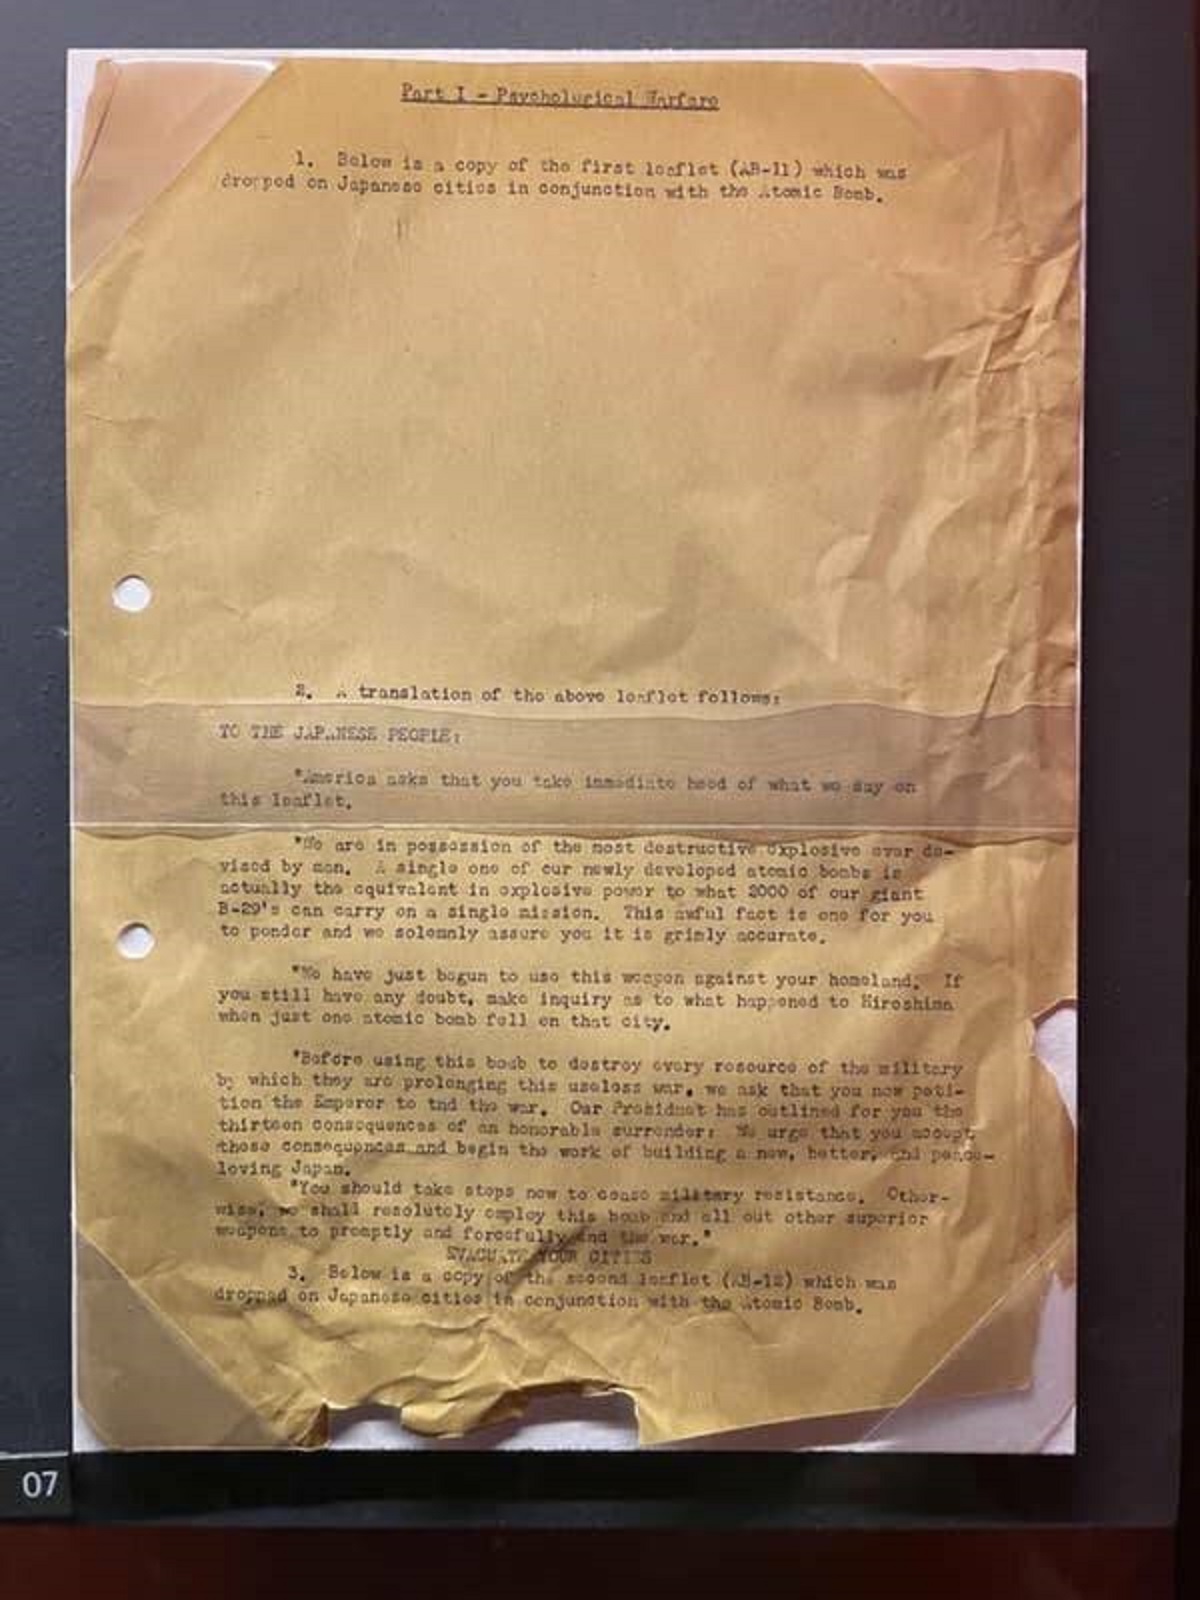 Here's the letter the United States dropped on Nagasaki before the atomic bomb.